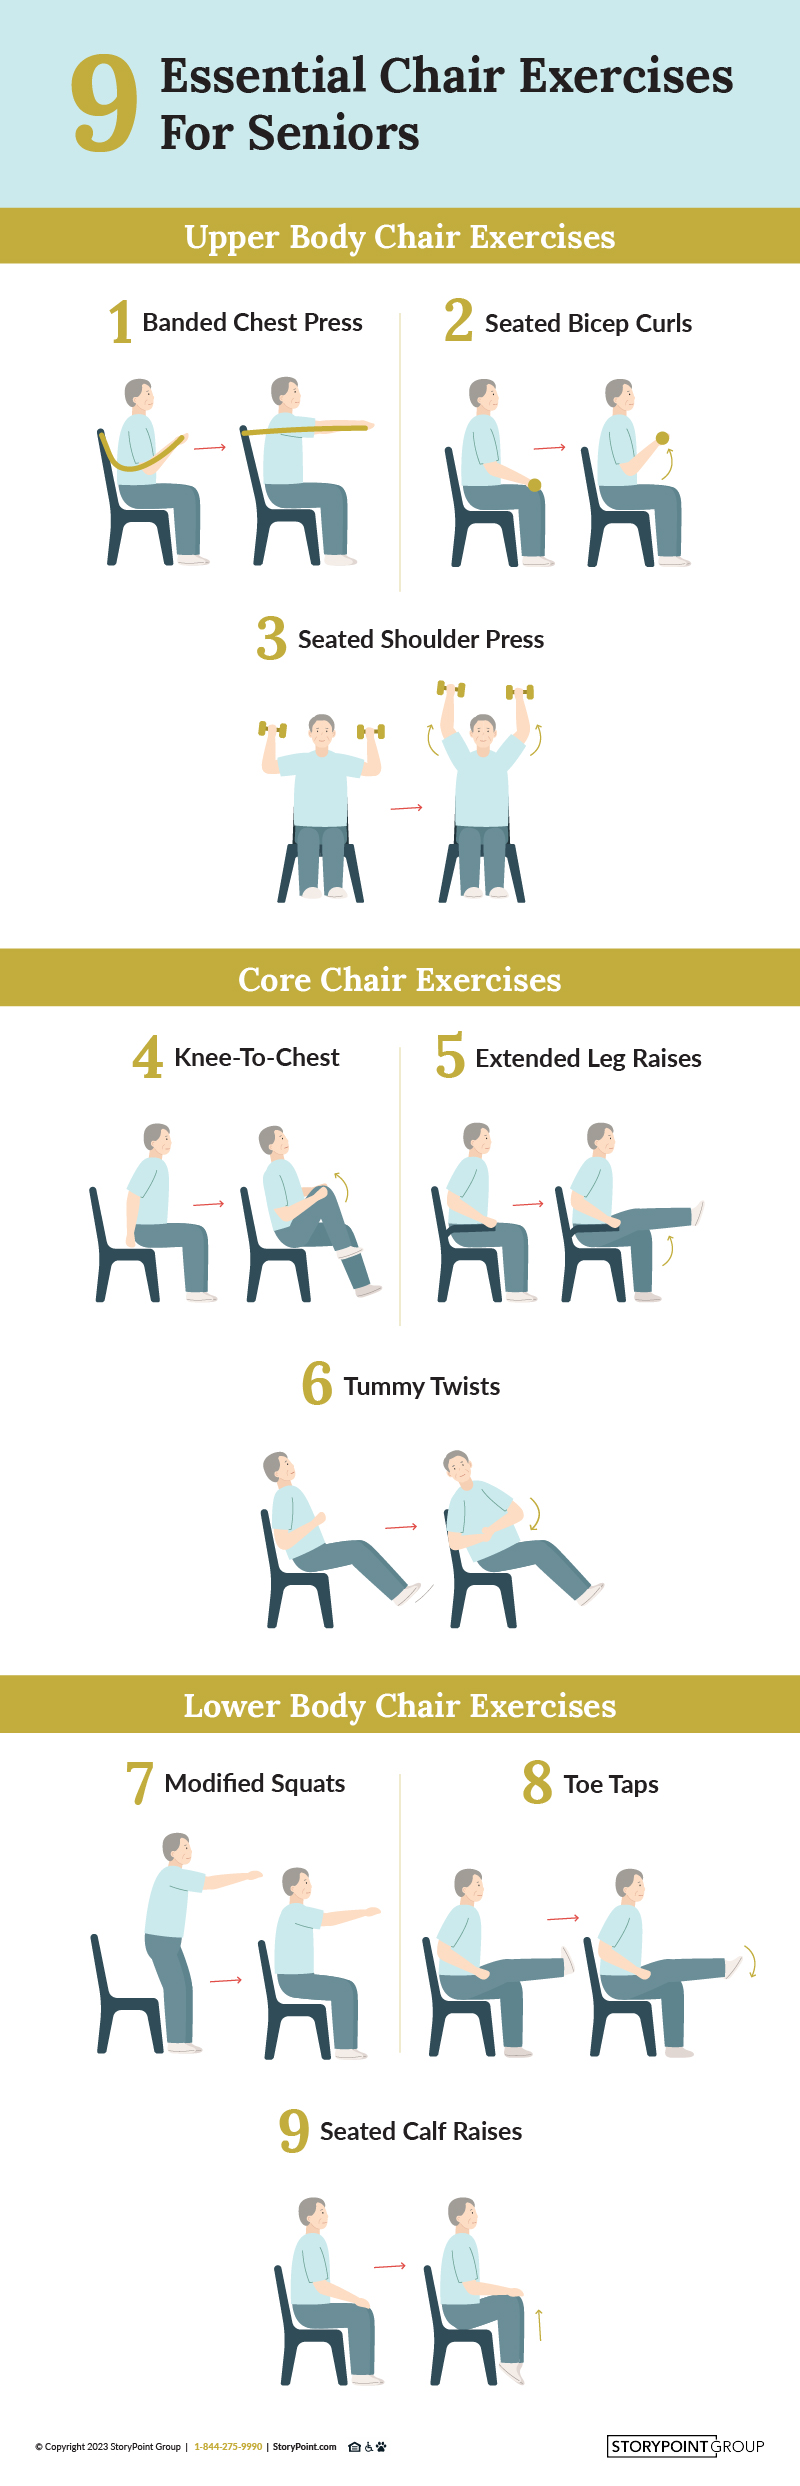 Best chair exercises for seniors: Safe and easy workouts